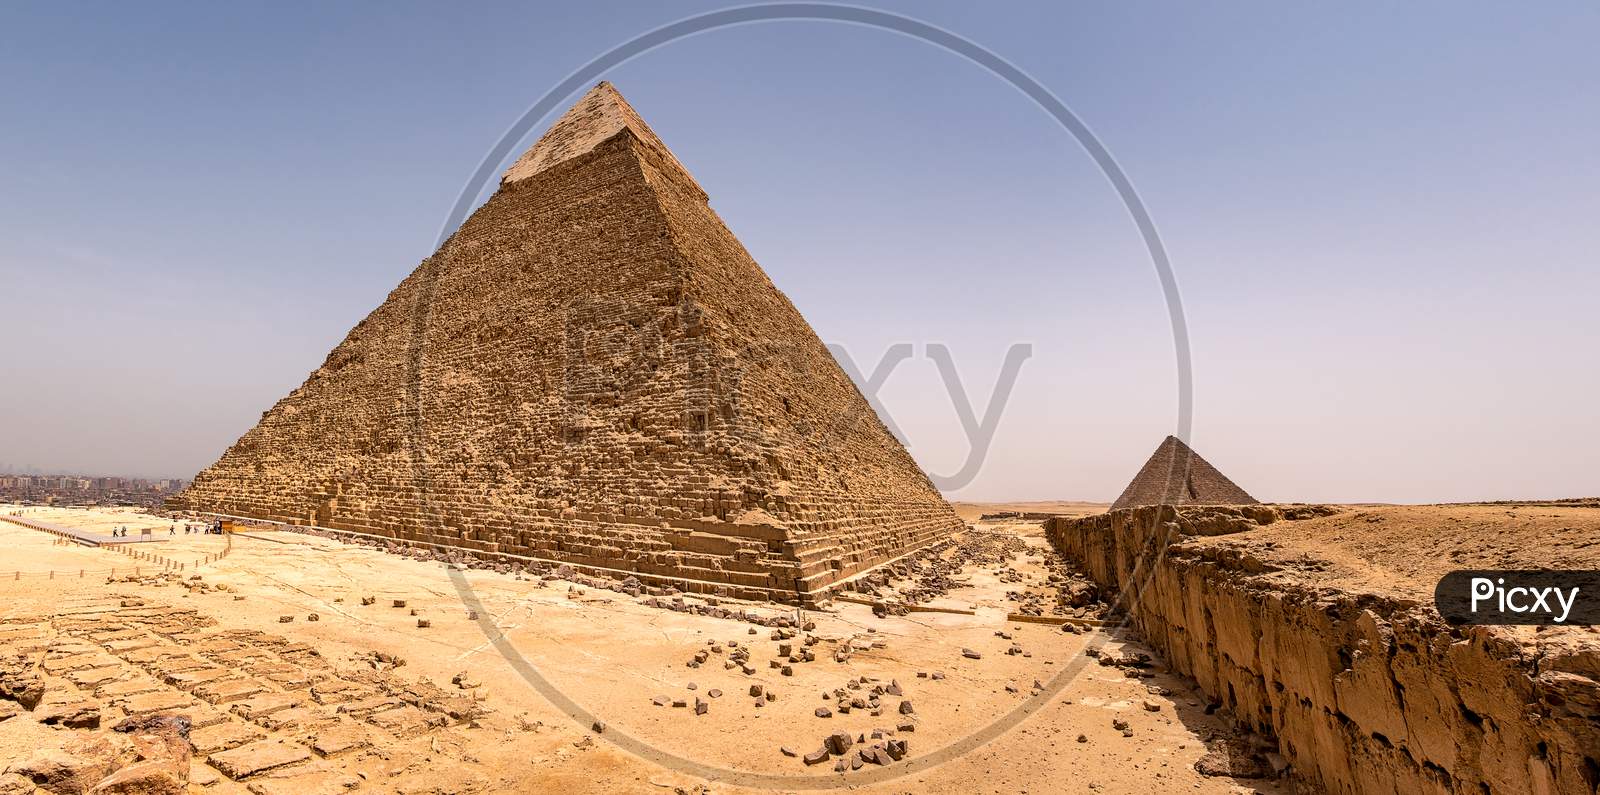 Panoramic View Of The Giza Plateau In Cairo, Egypt With The Pyramid Of Khafre (Pyramid Of Chephren) And The Pyramid Of Menkaure